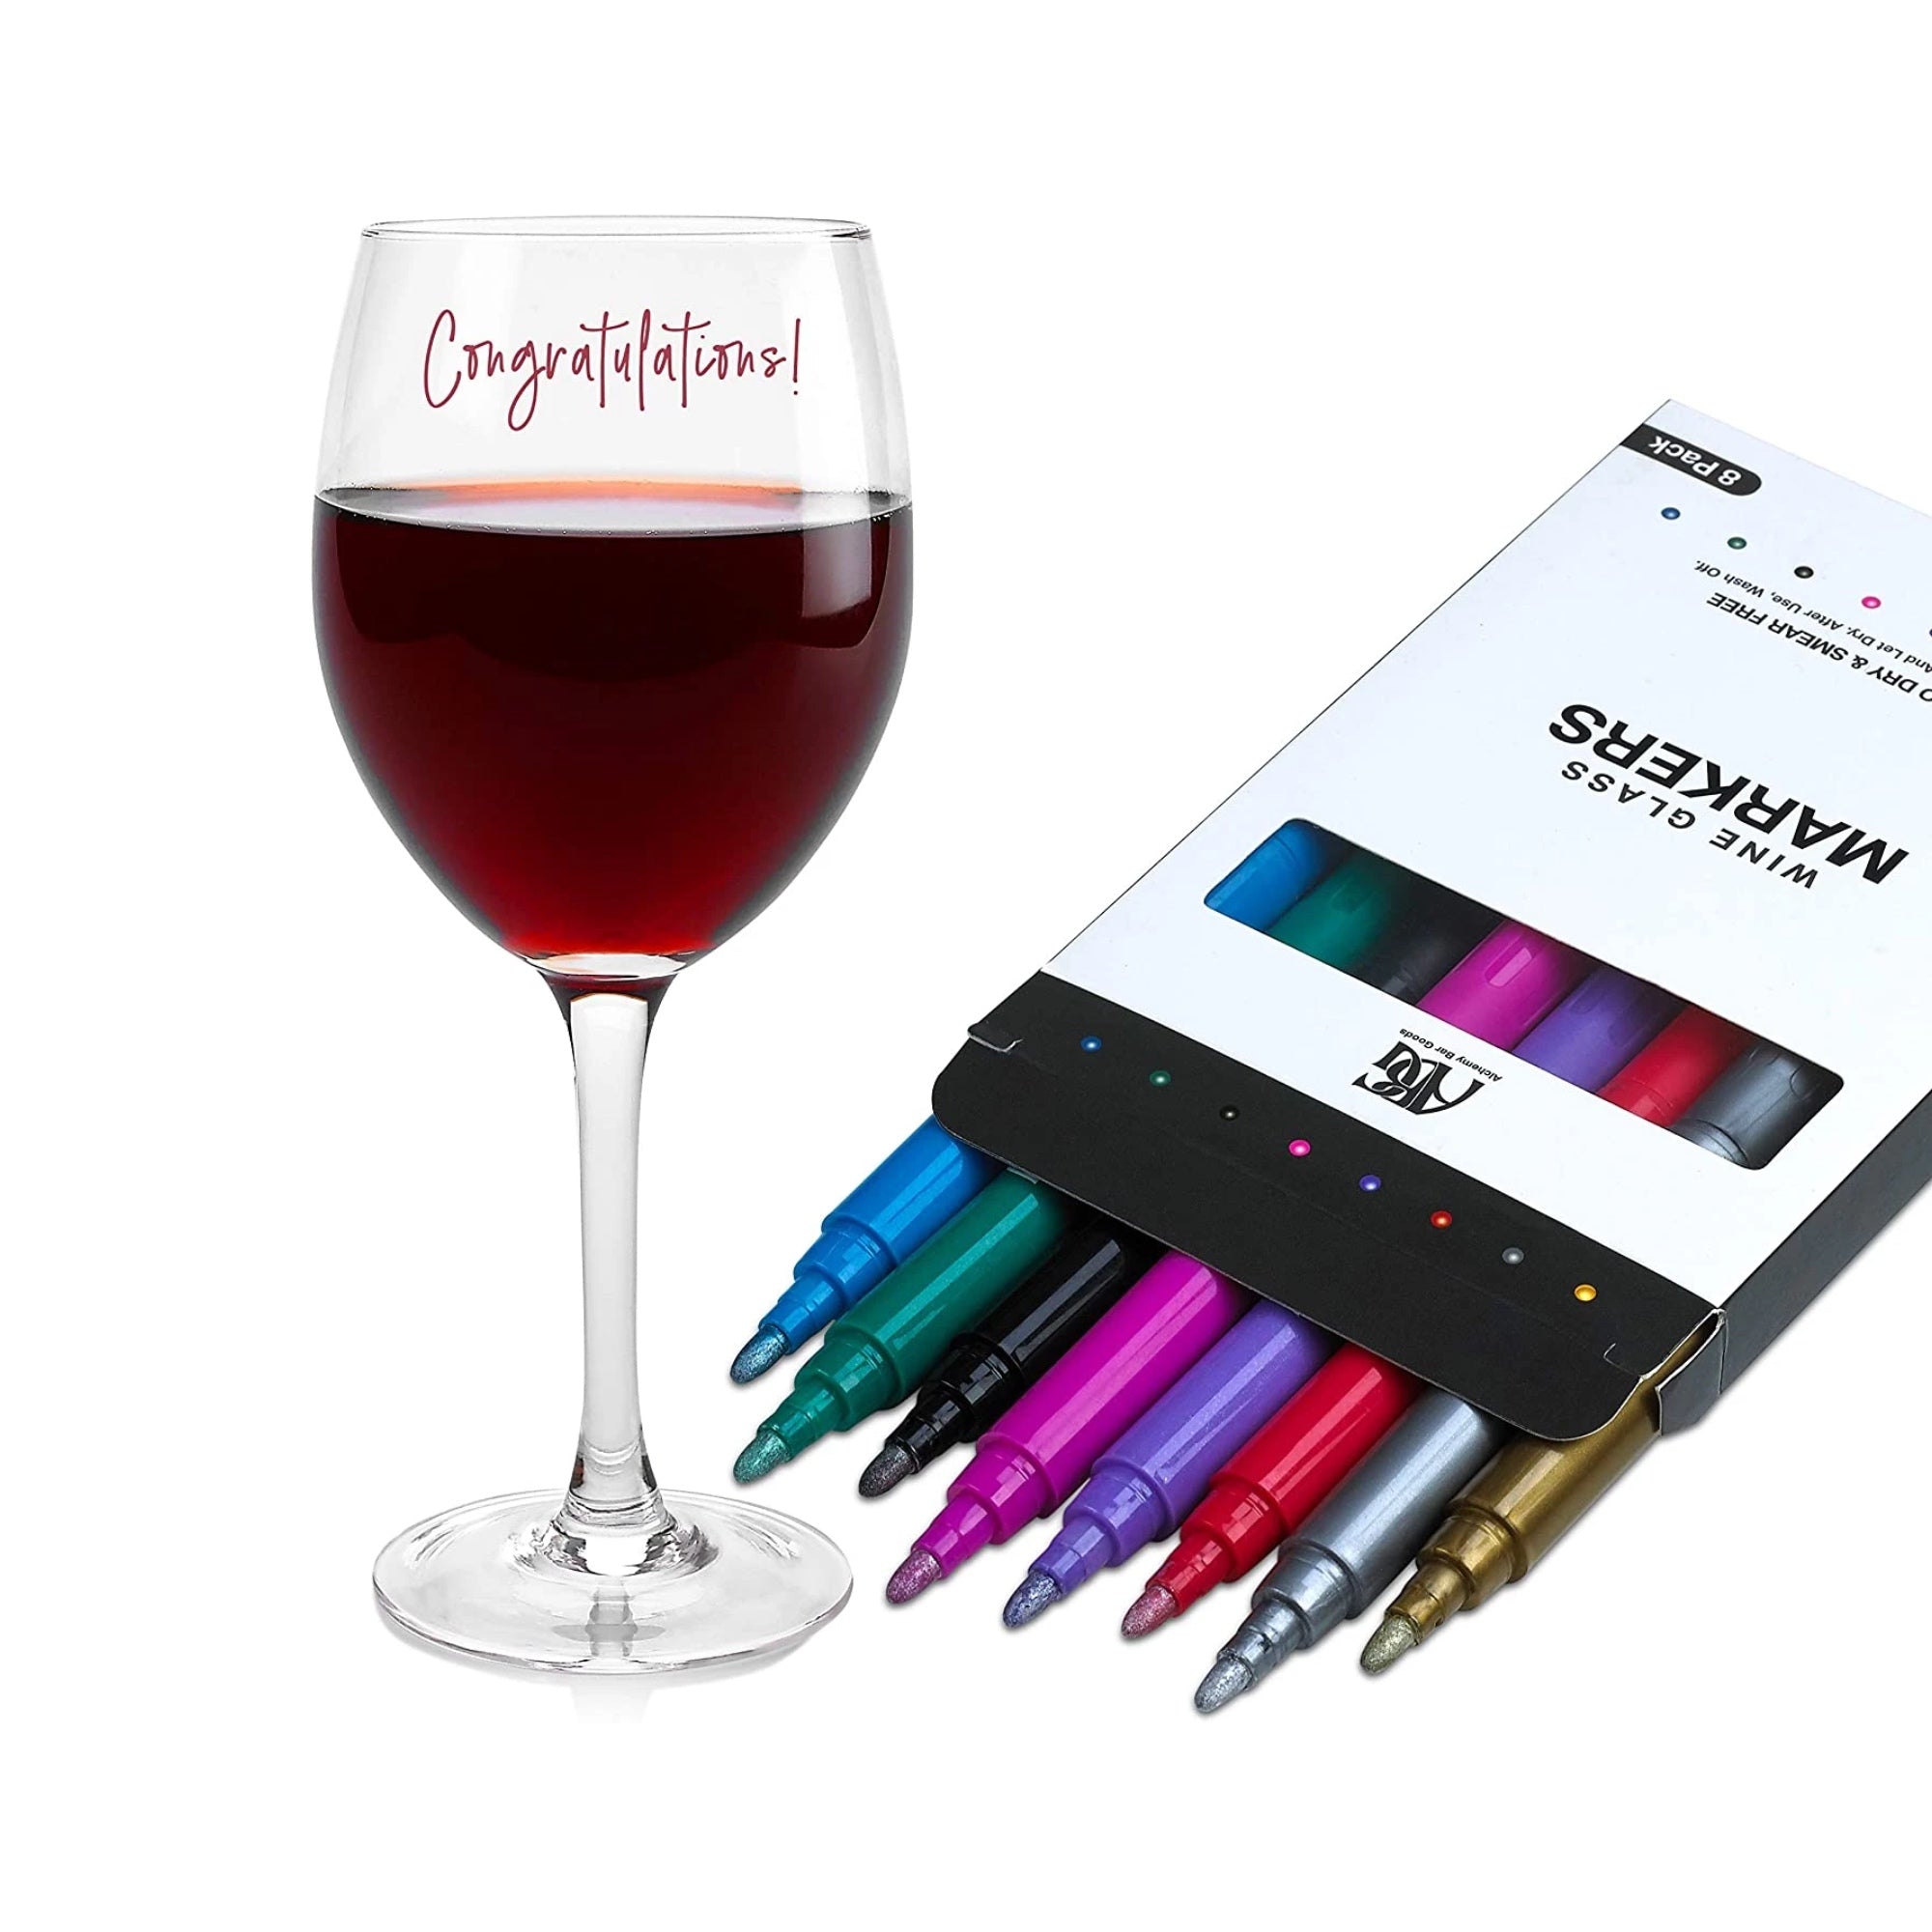 Wine Glass Markers - Pack of 5 Wine Glass Marker Pens Metallic Colors Best Wine Charms Alternative - Fun Wine Accessories - No Smearing & Fast Drying